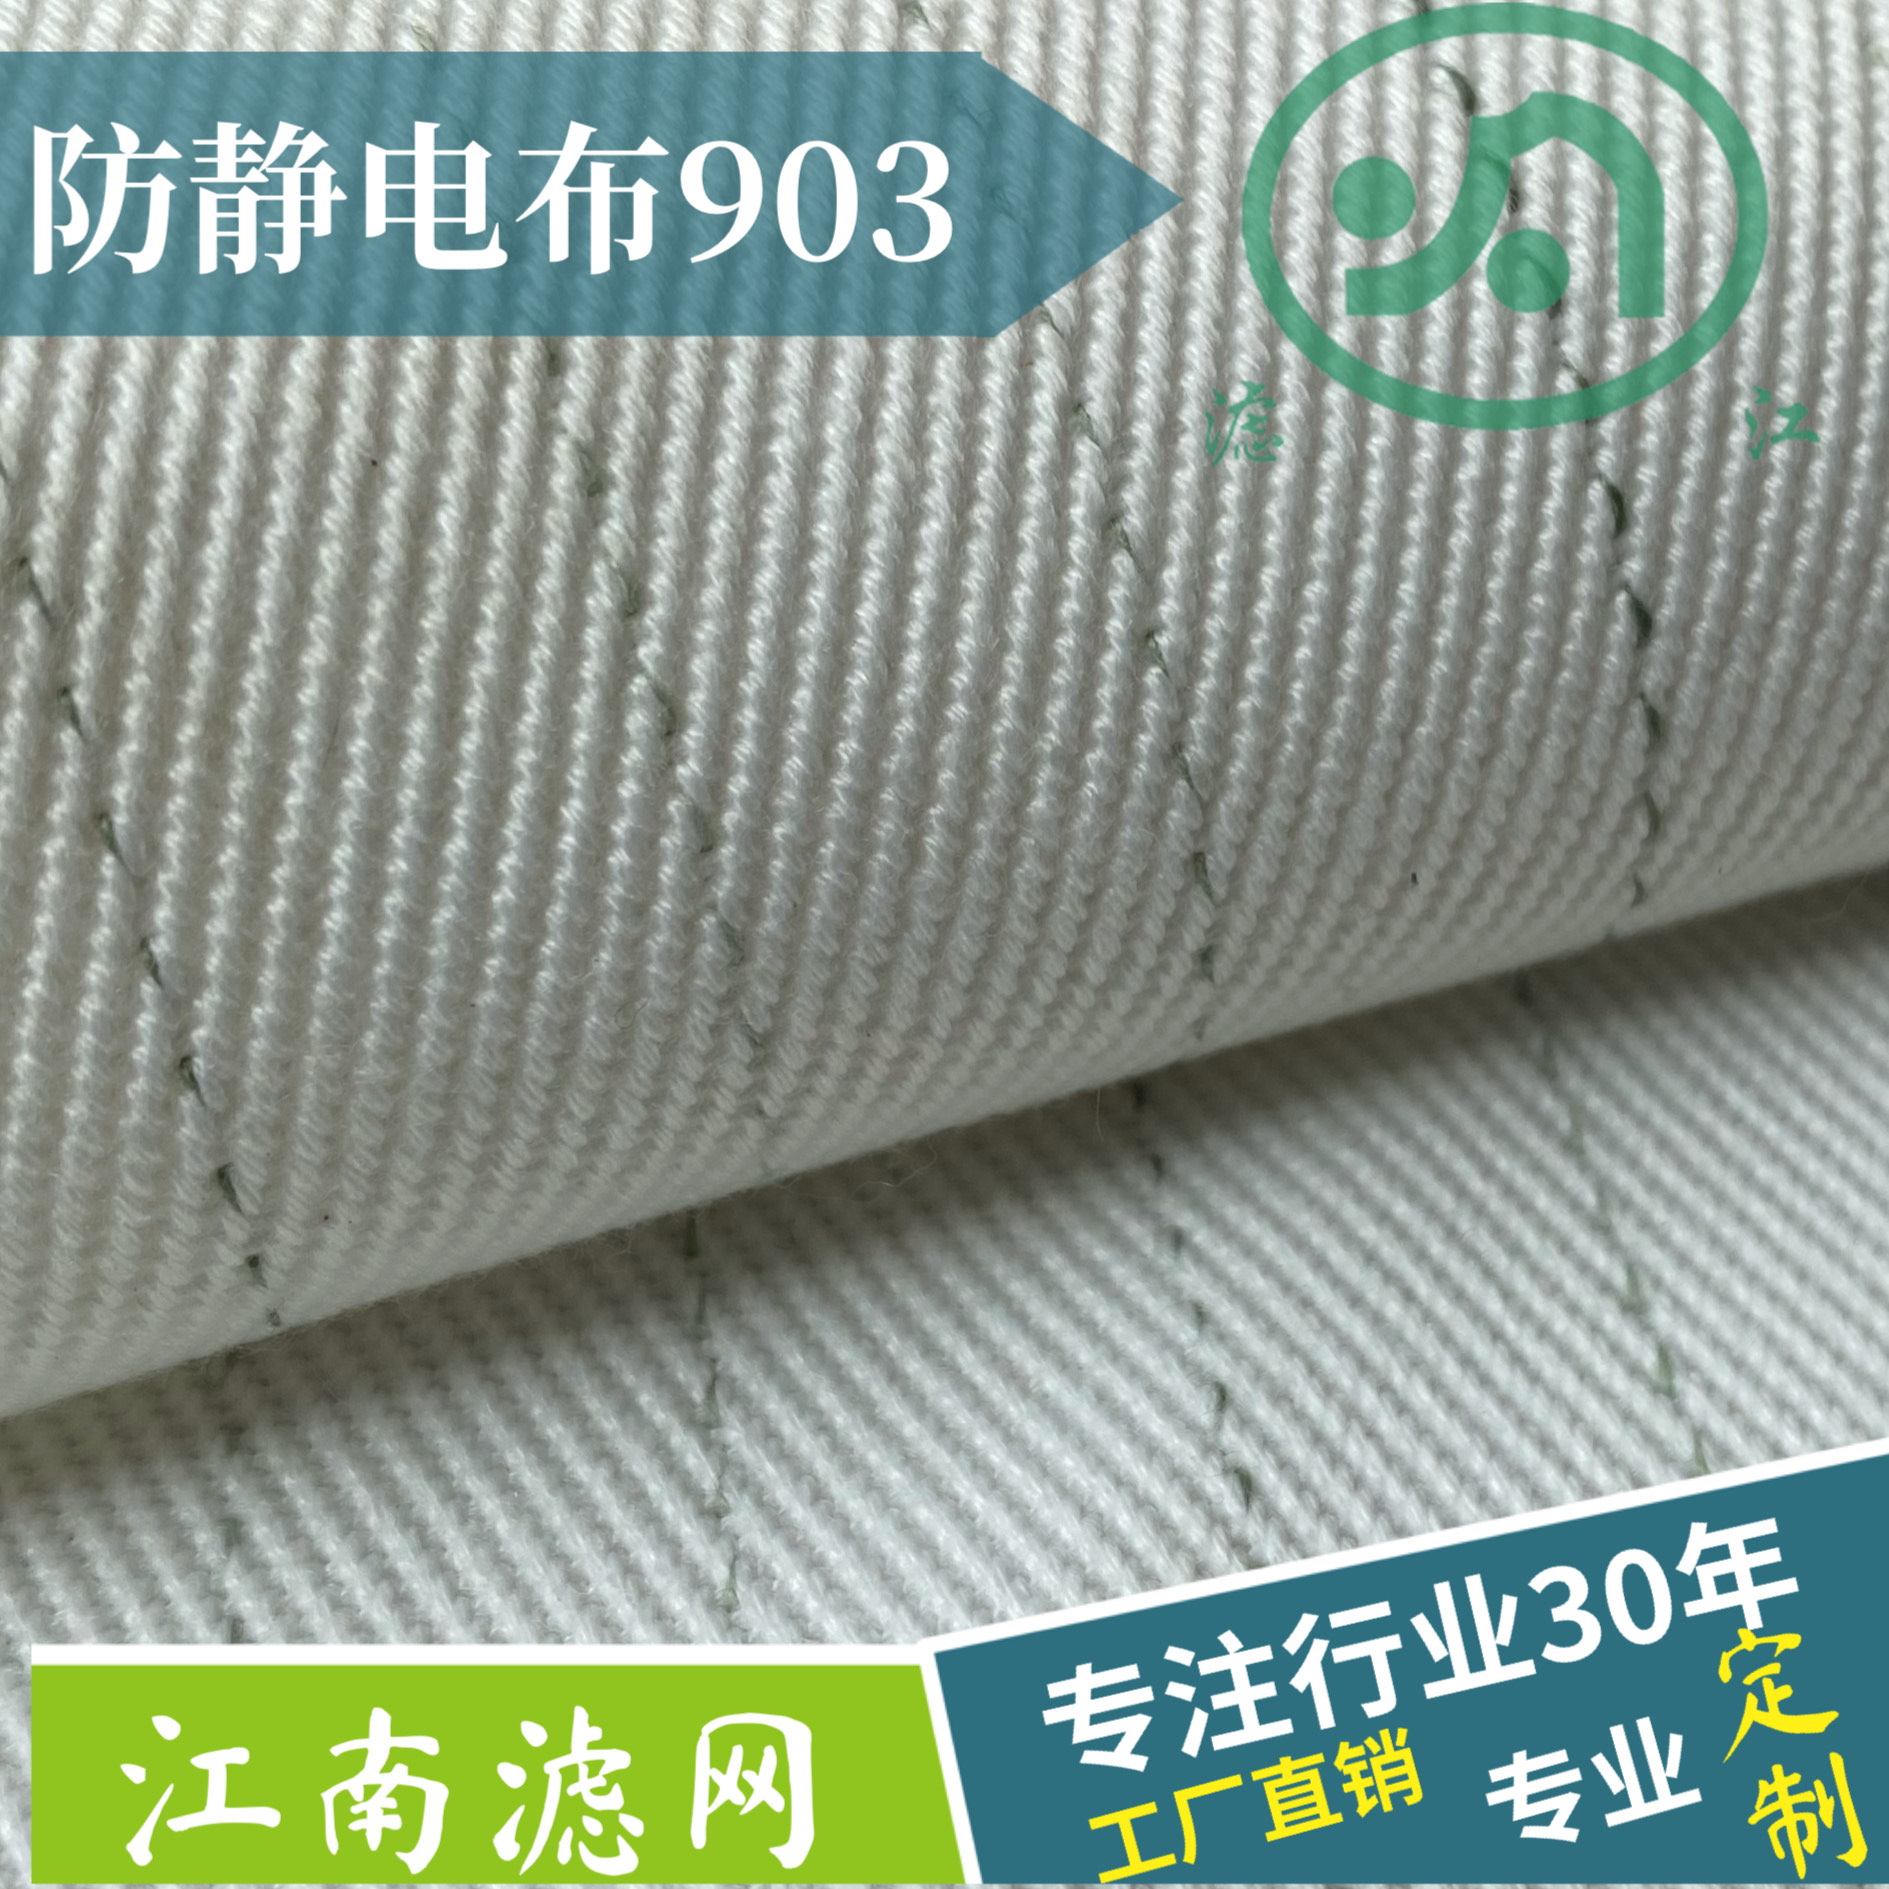 Polyester filter cloth 903